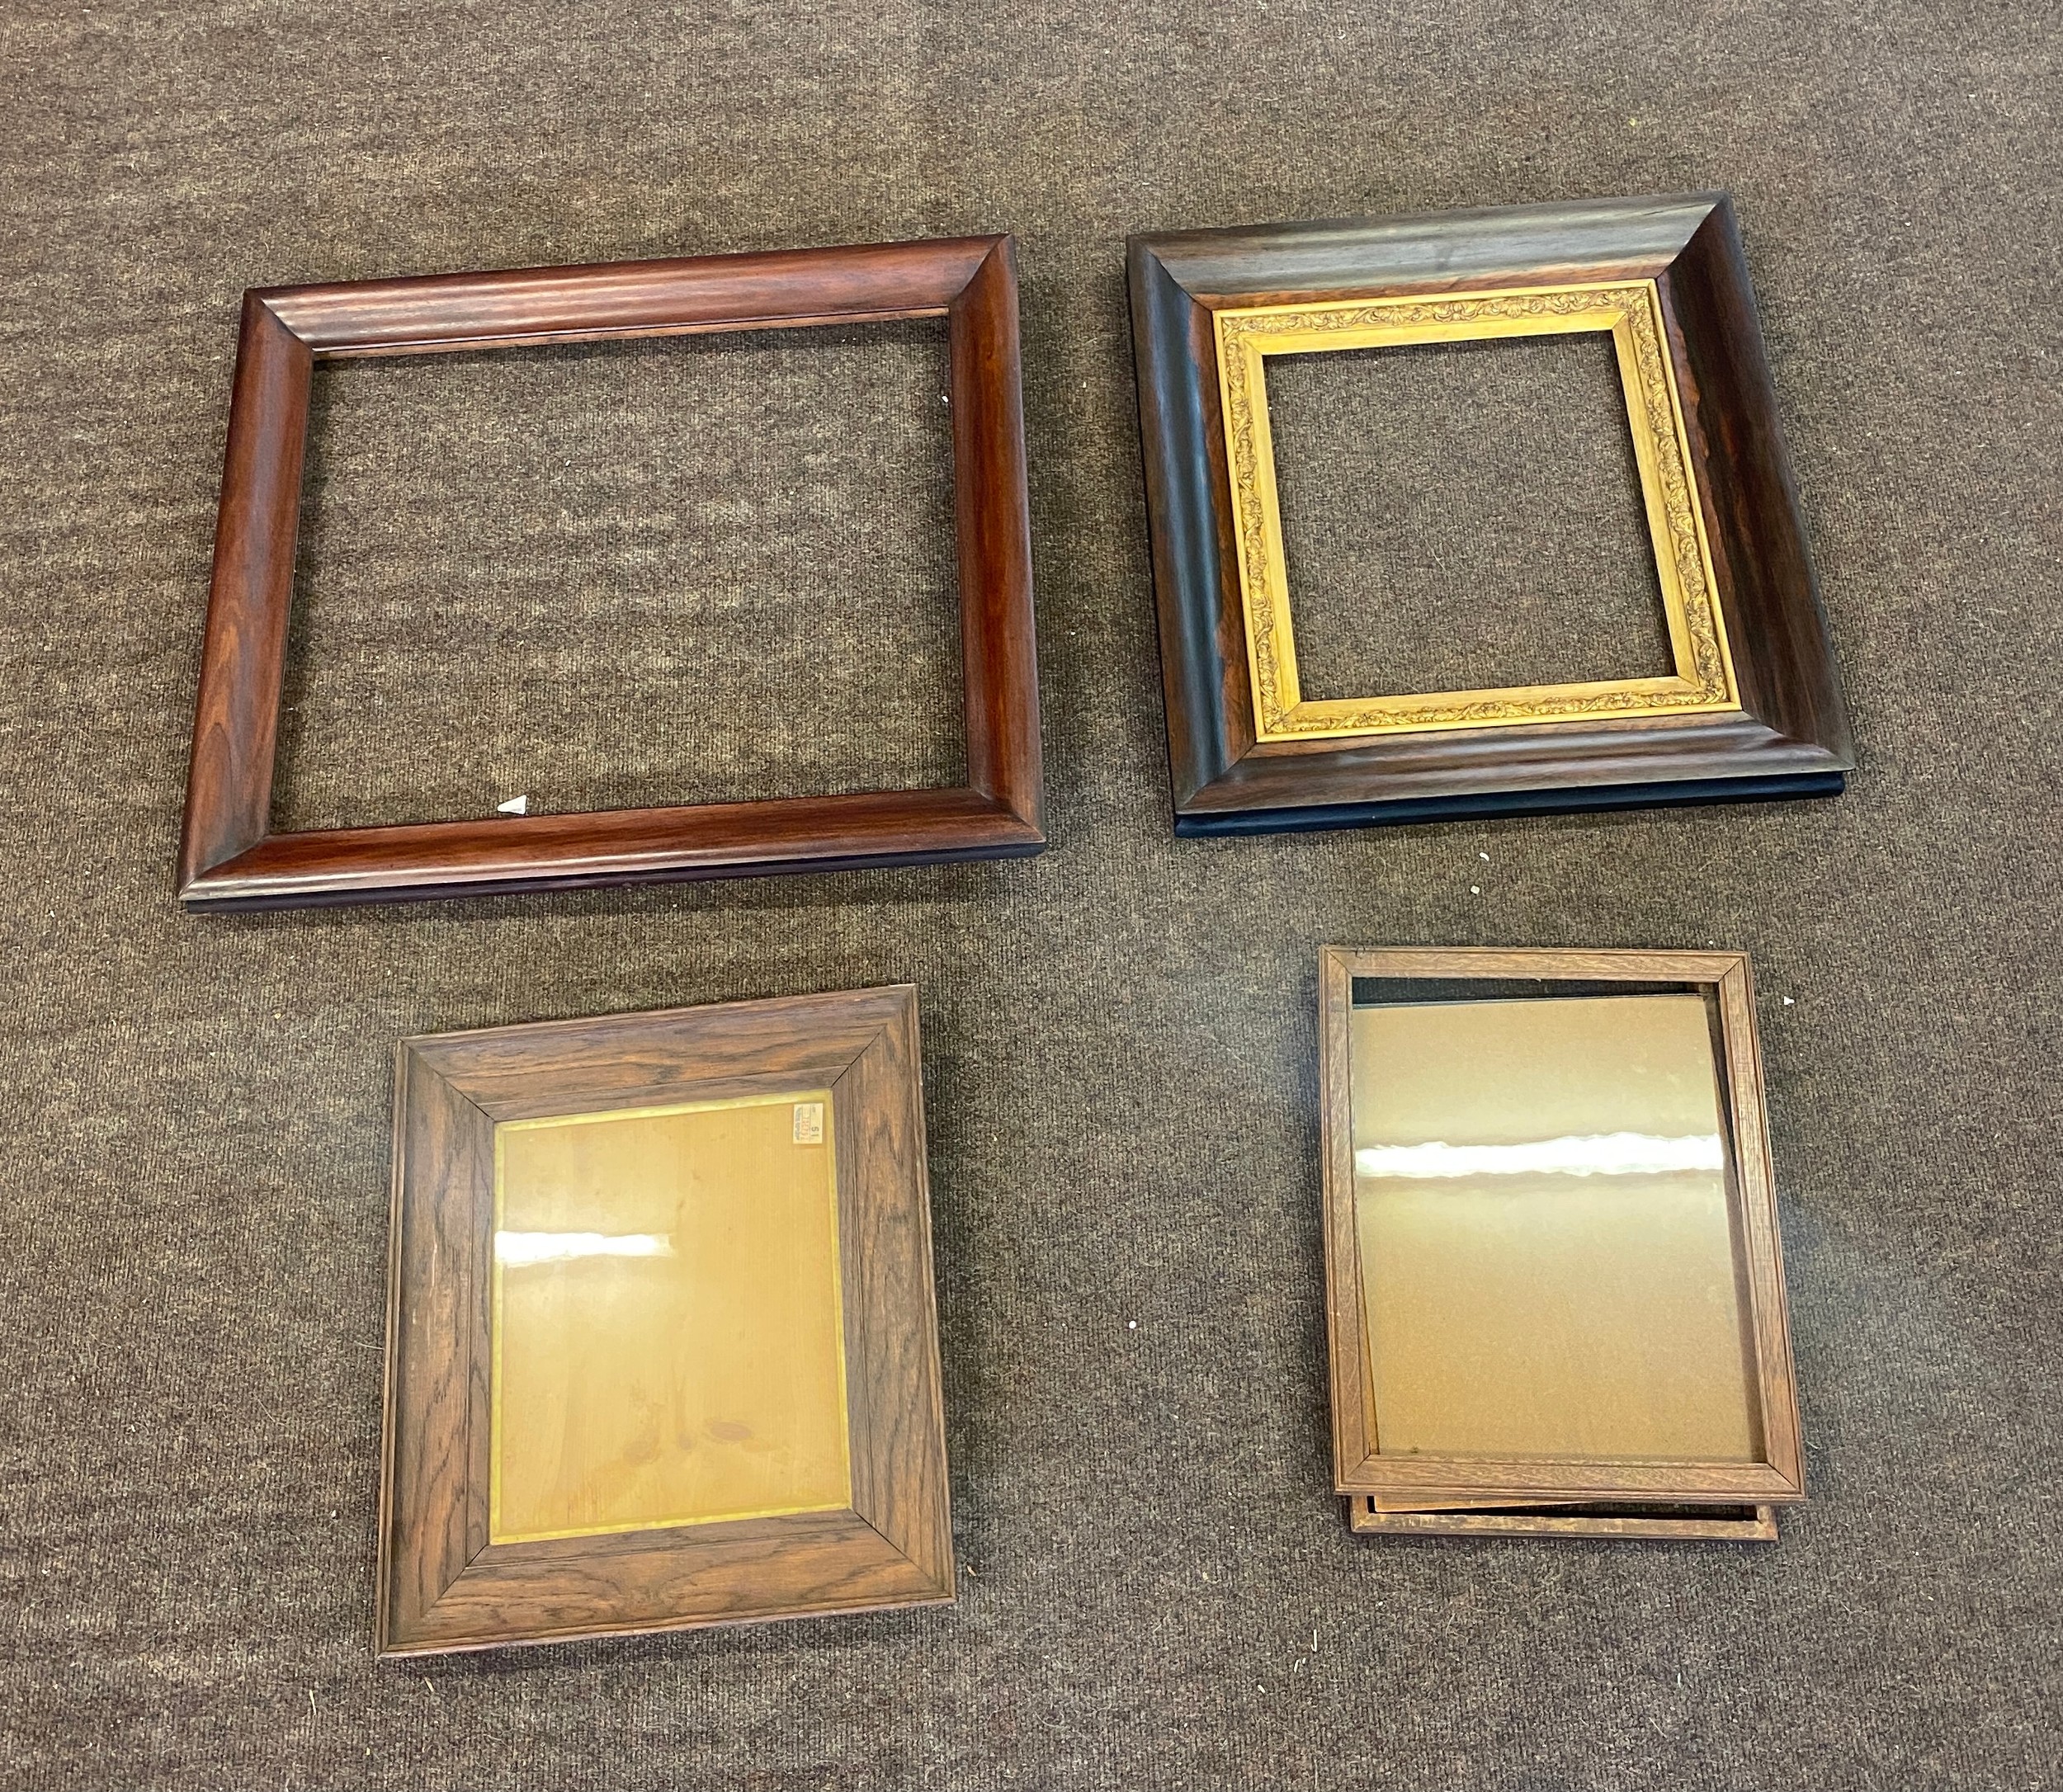 Large selection of vintage wooden frames largest measures approx 22.5" wide by 26" tall